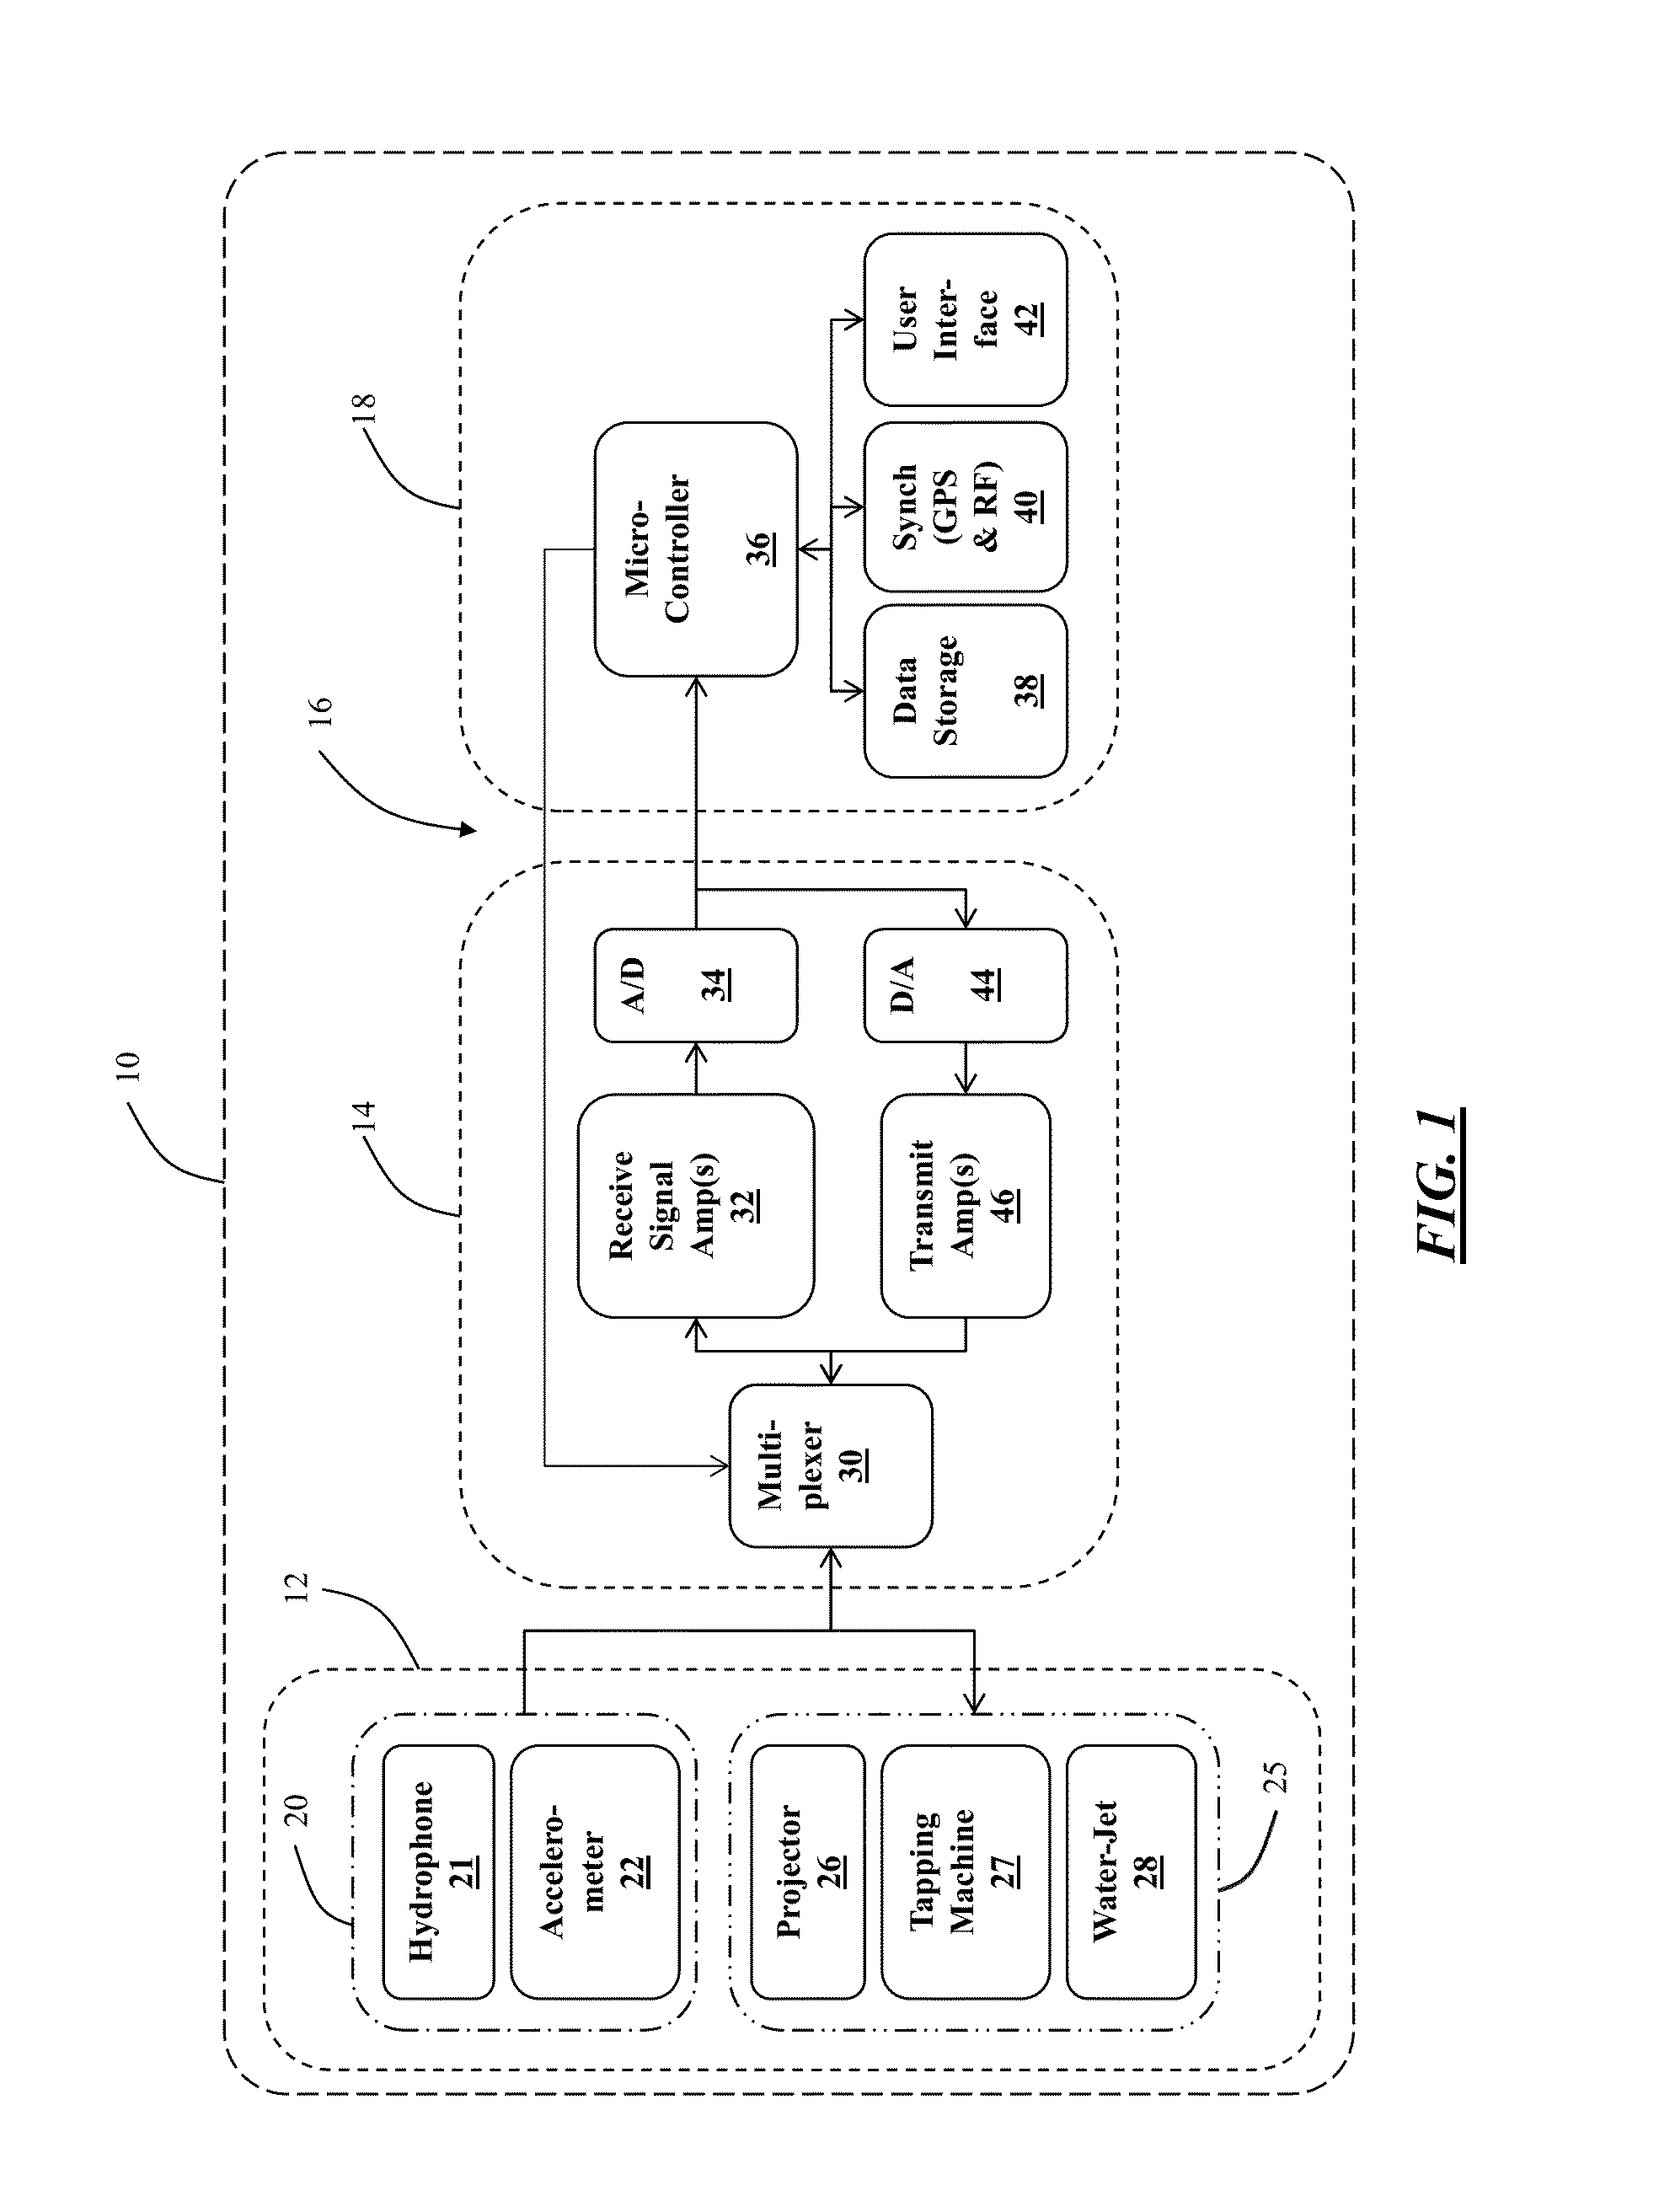 Method and apparatus for detecting, identifying and locating anomalous events within a pressurized pipe network